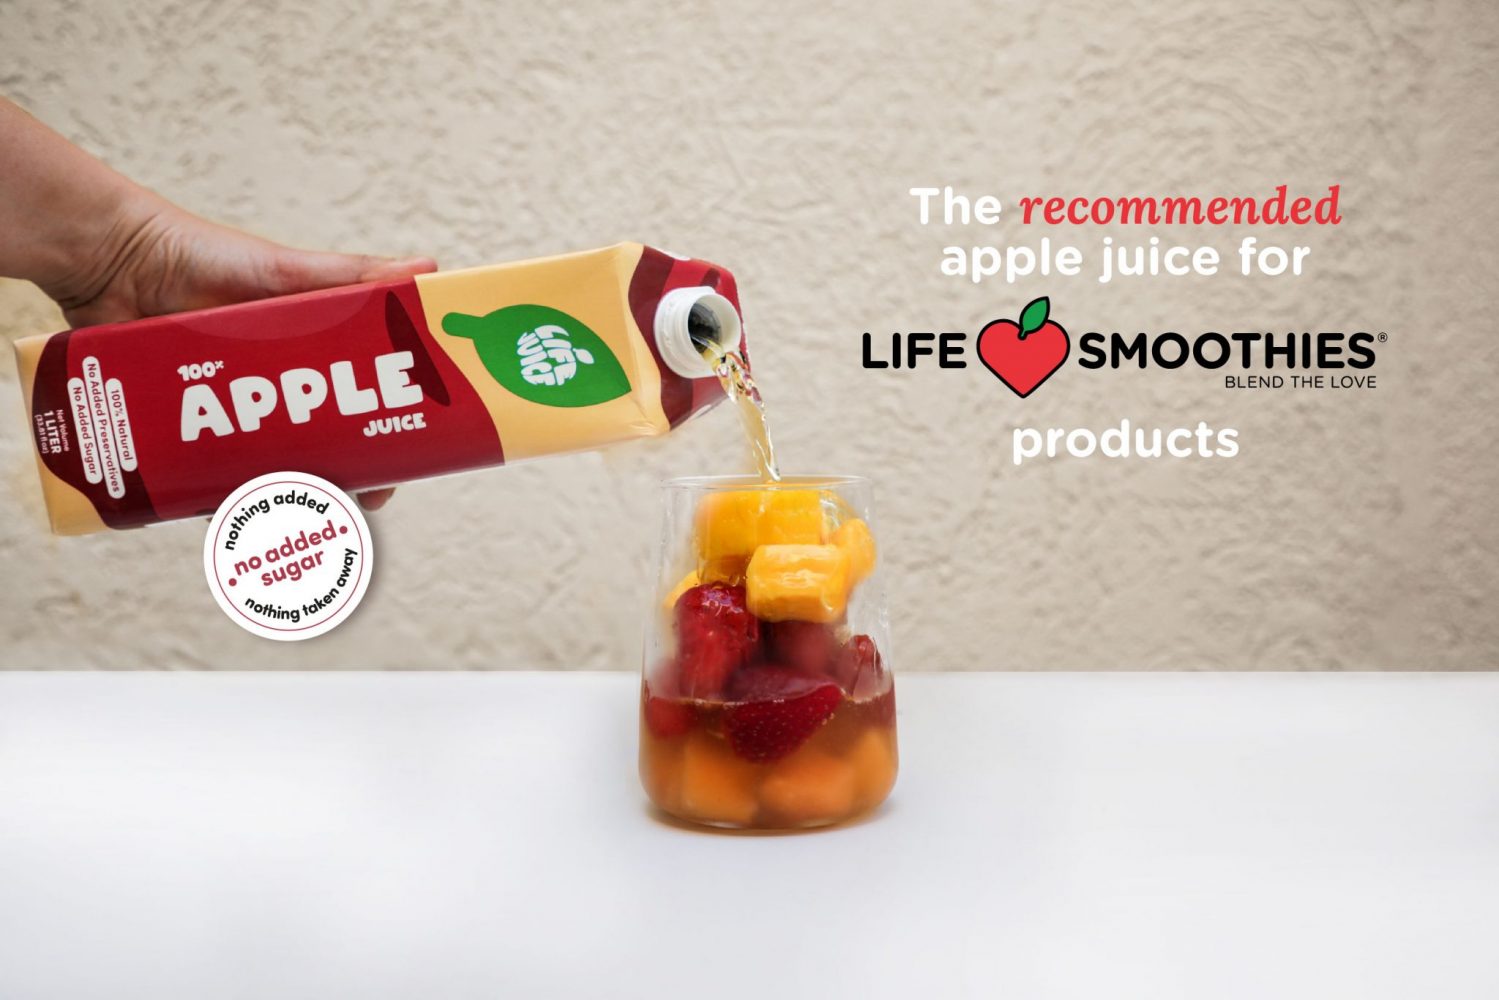 Life Juice – The Recommended Apple Juice for Life Smoothies’ pre-portioned frozen smoothie products